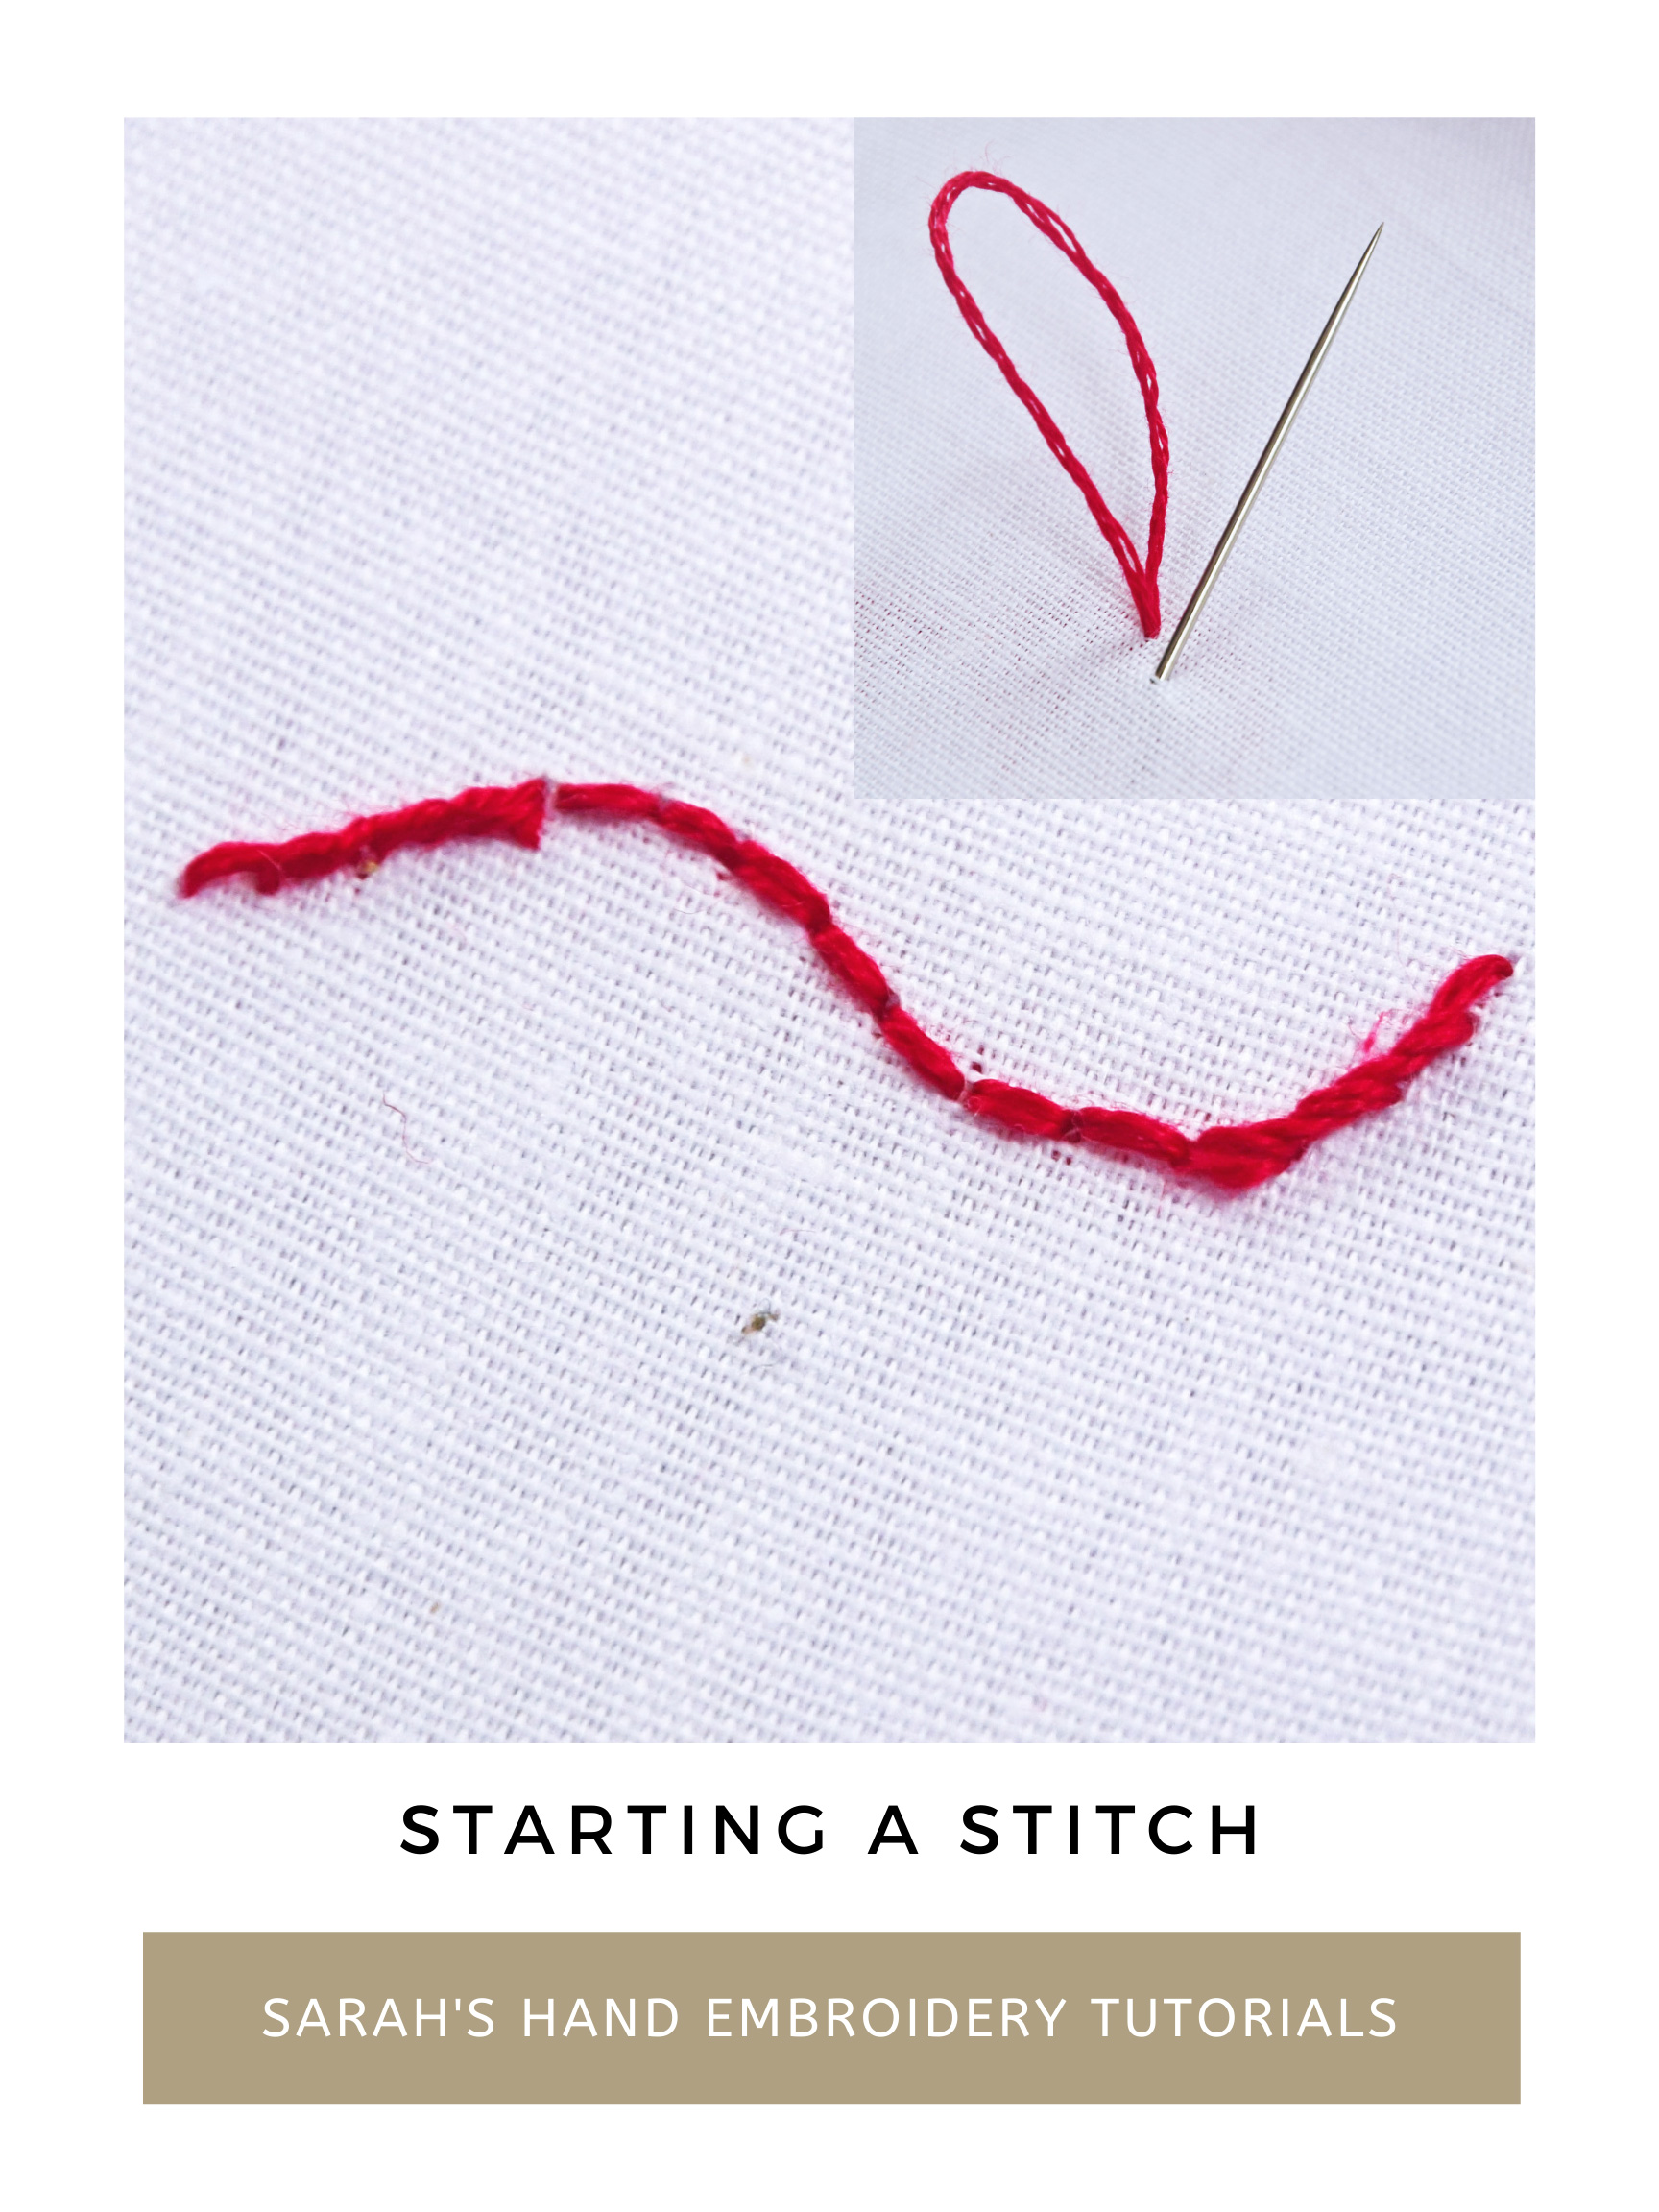 How to do the Split Stitch - Sarah's Hand Embroidery Tutorials